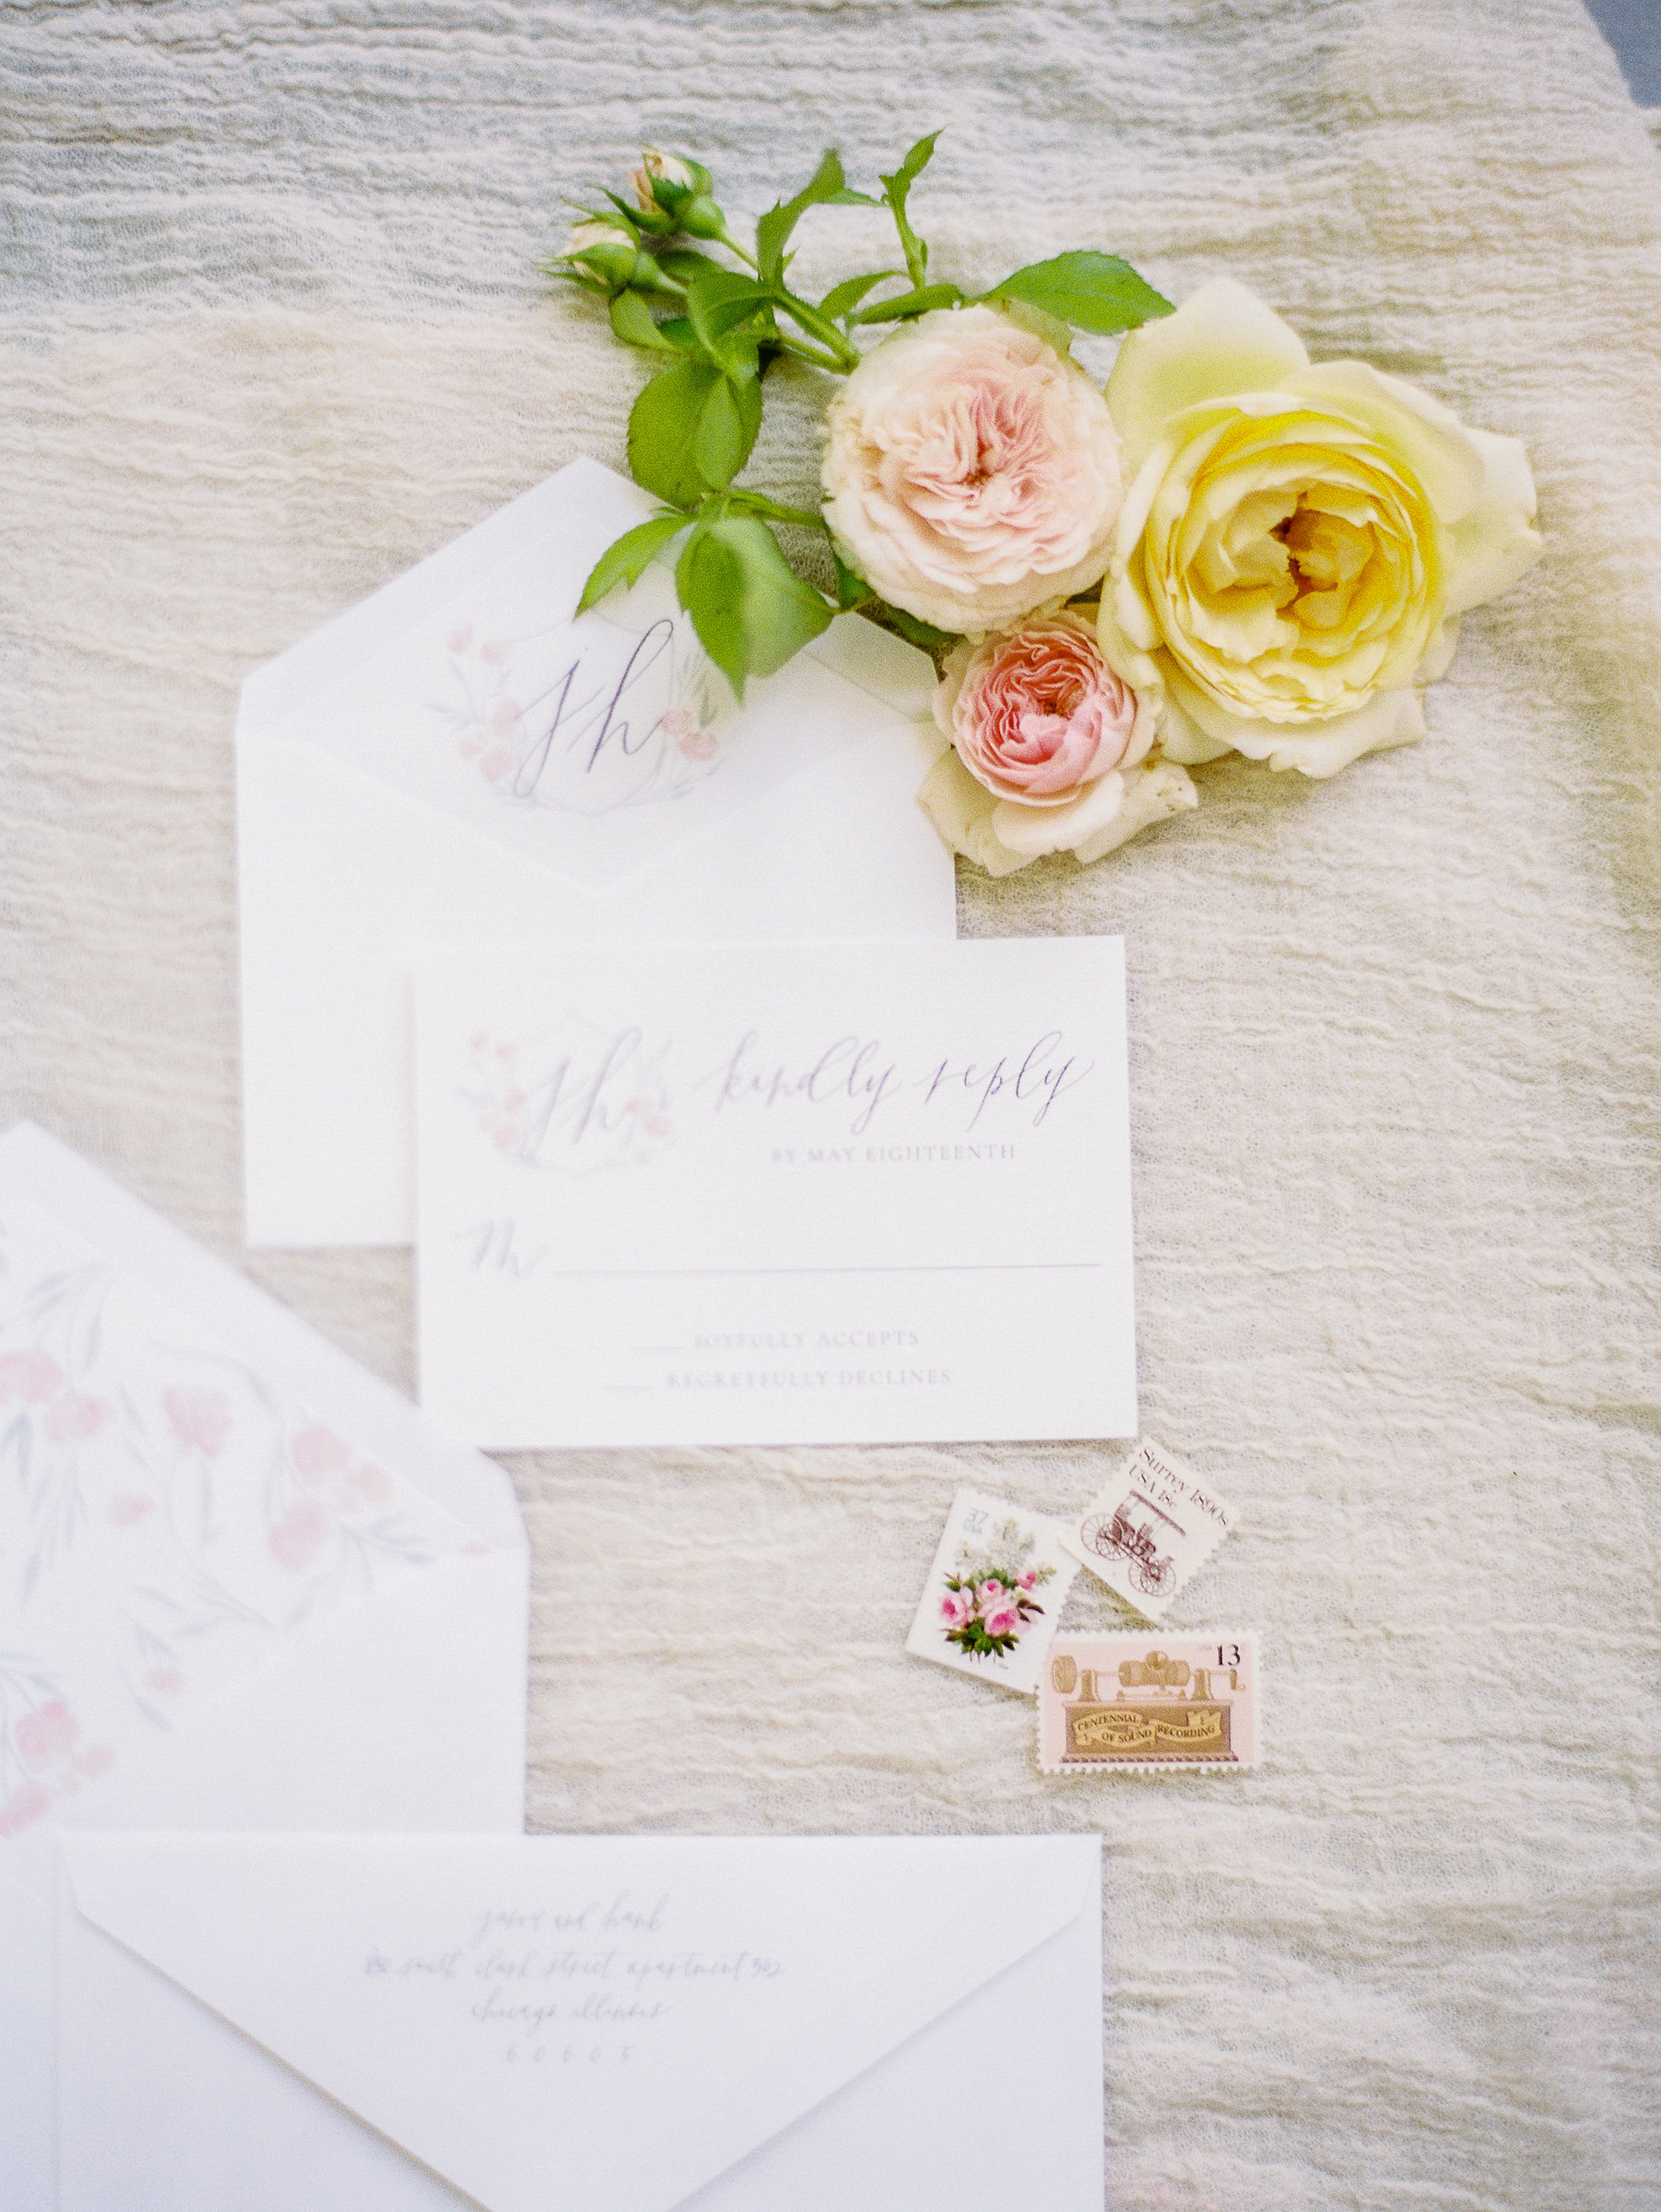 Watercolor Invitations | The Day's Design | Ashley Slater Photography